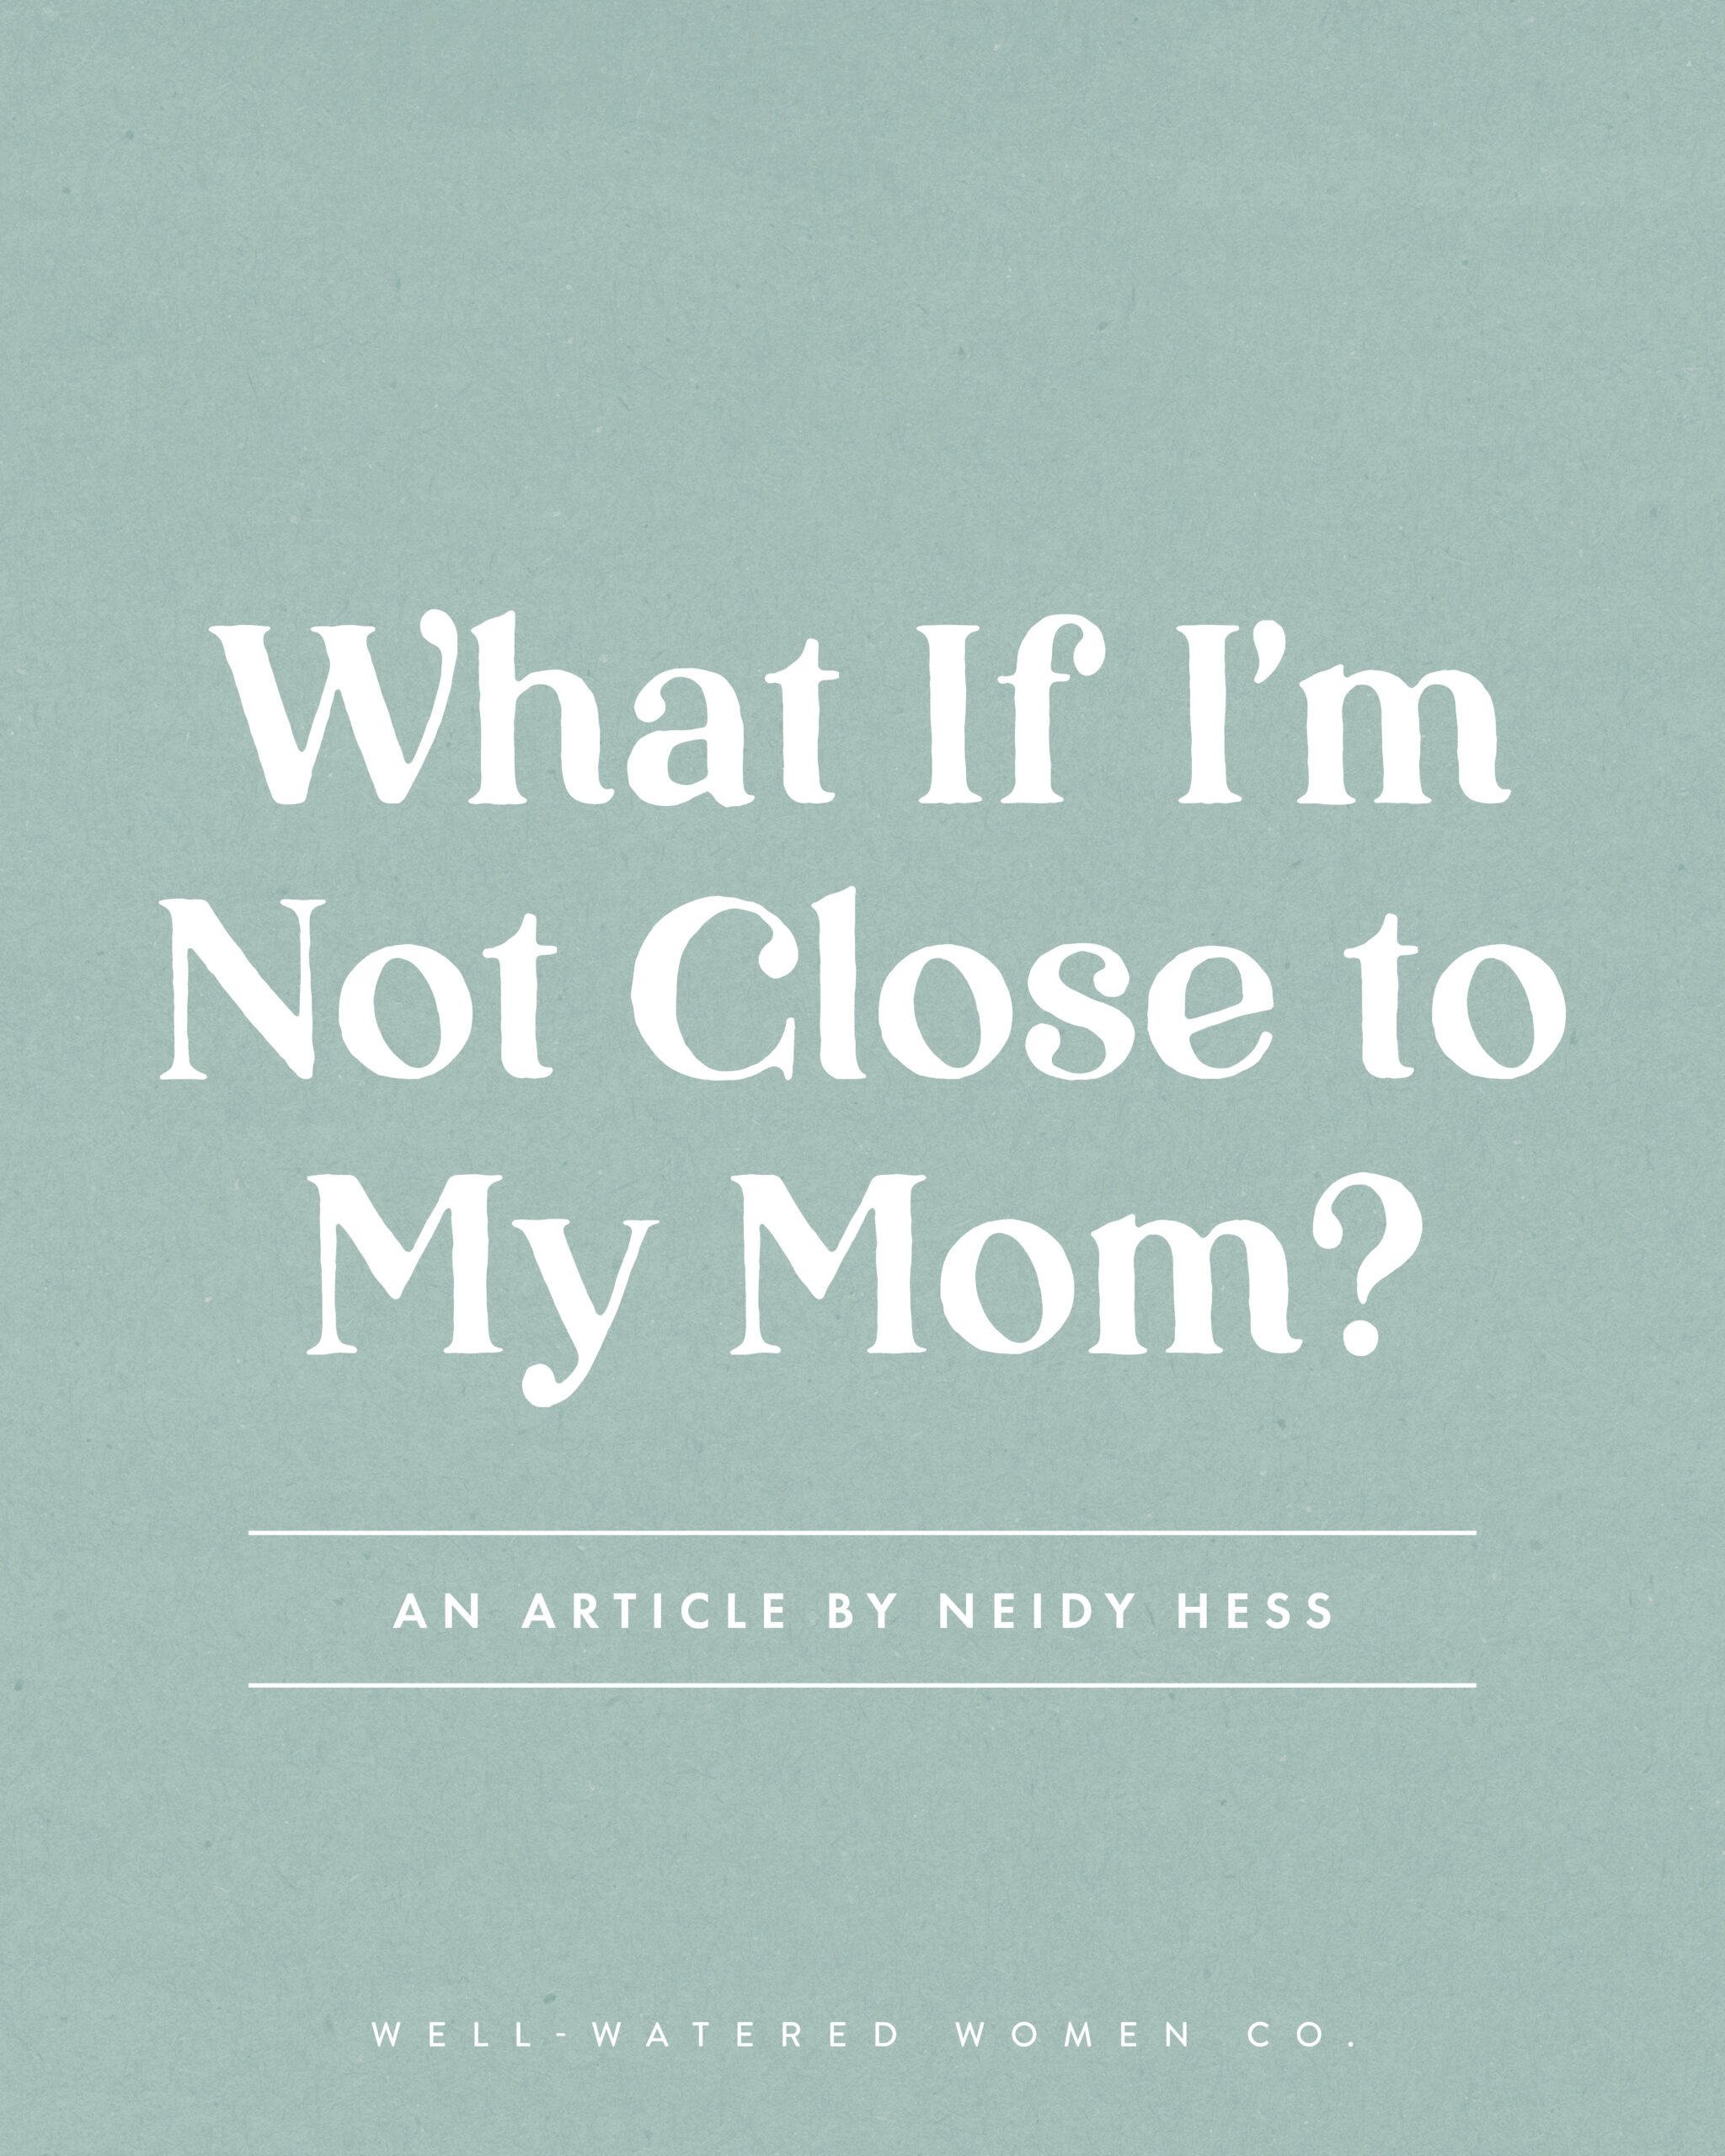 What If I'm Not Close to My Mom? - an article from Well-Watered Women